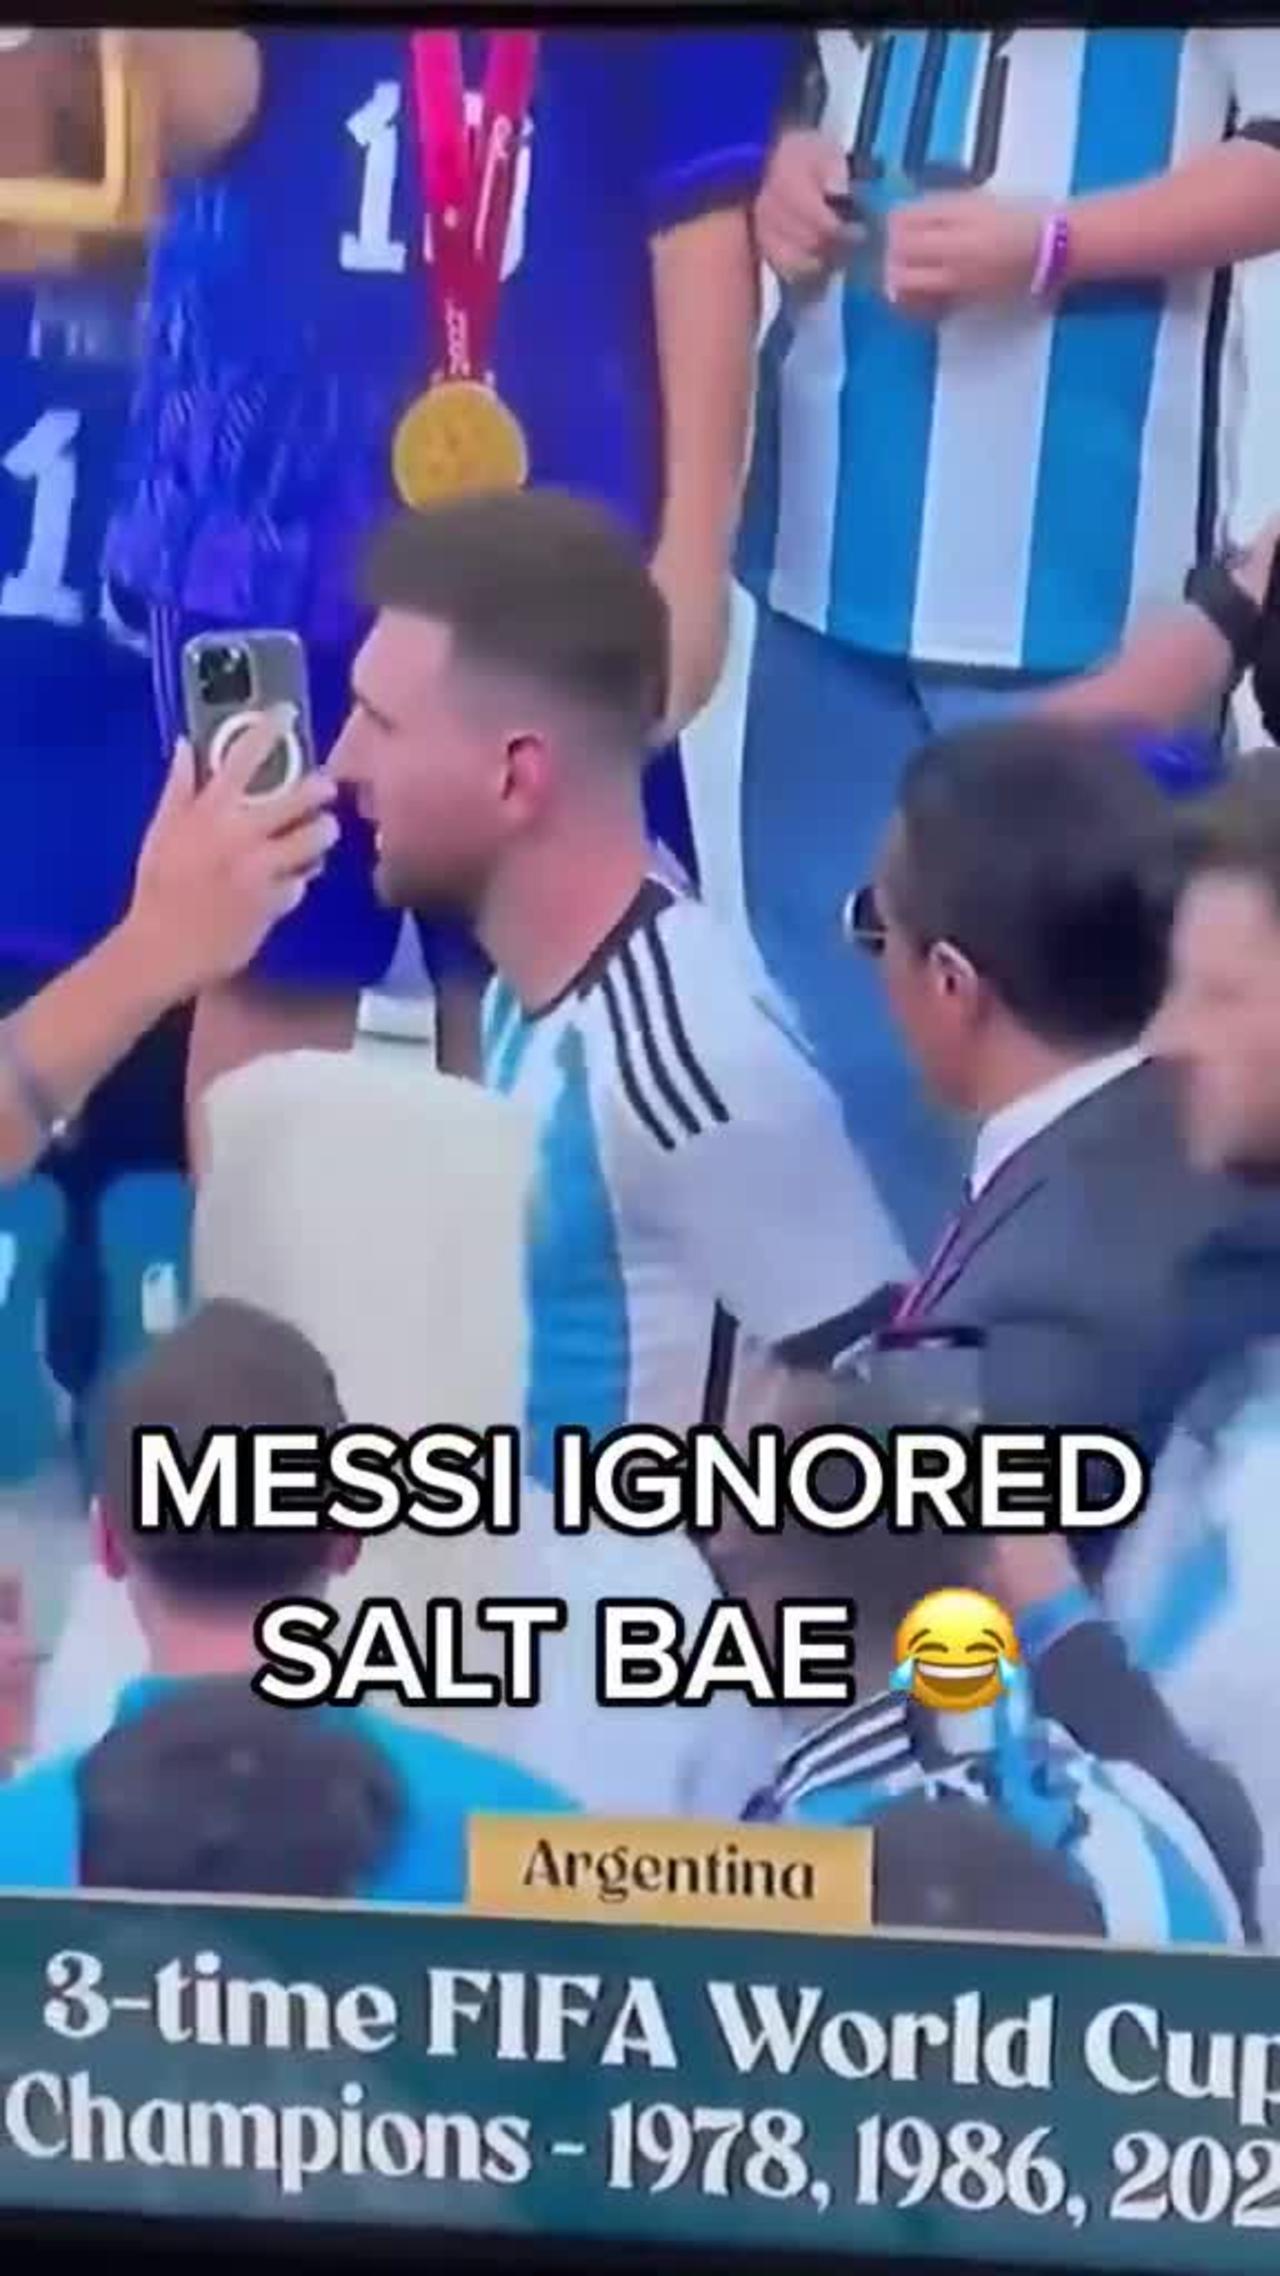 Lionel Messi Ignored Salt Bae After Winning the World Cup #shorts